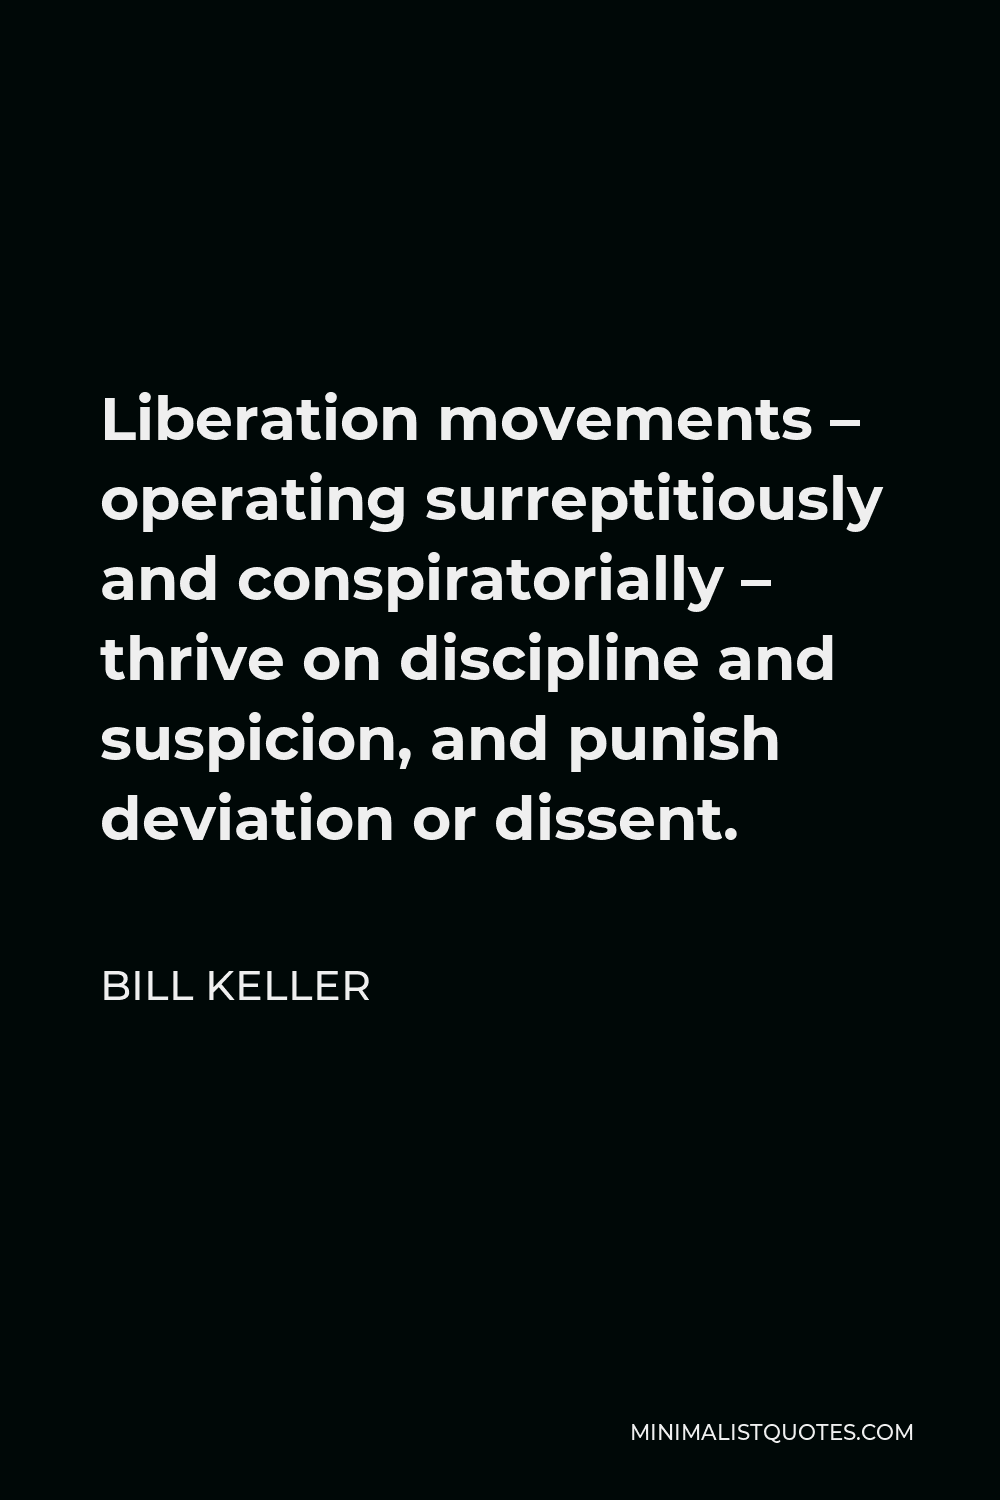 Bill Keller Quote - Liberation movements – operating surreptitiously and conspiratorially – thrive on discipline and suspicion, and punish deviation or dissent.